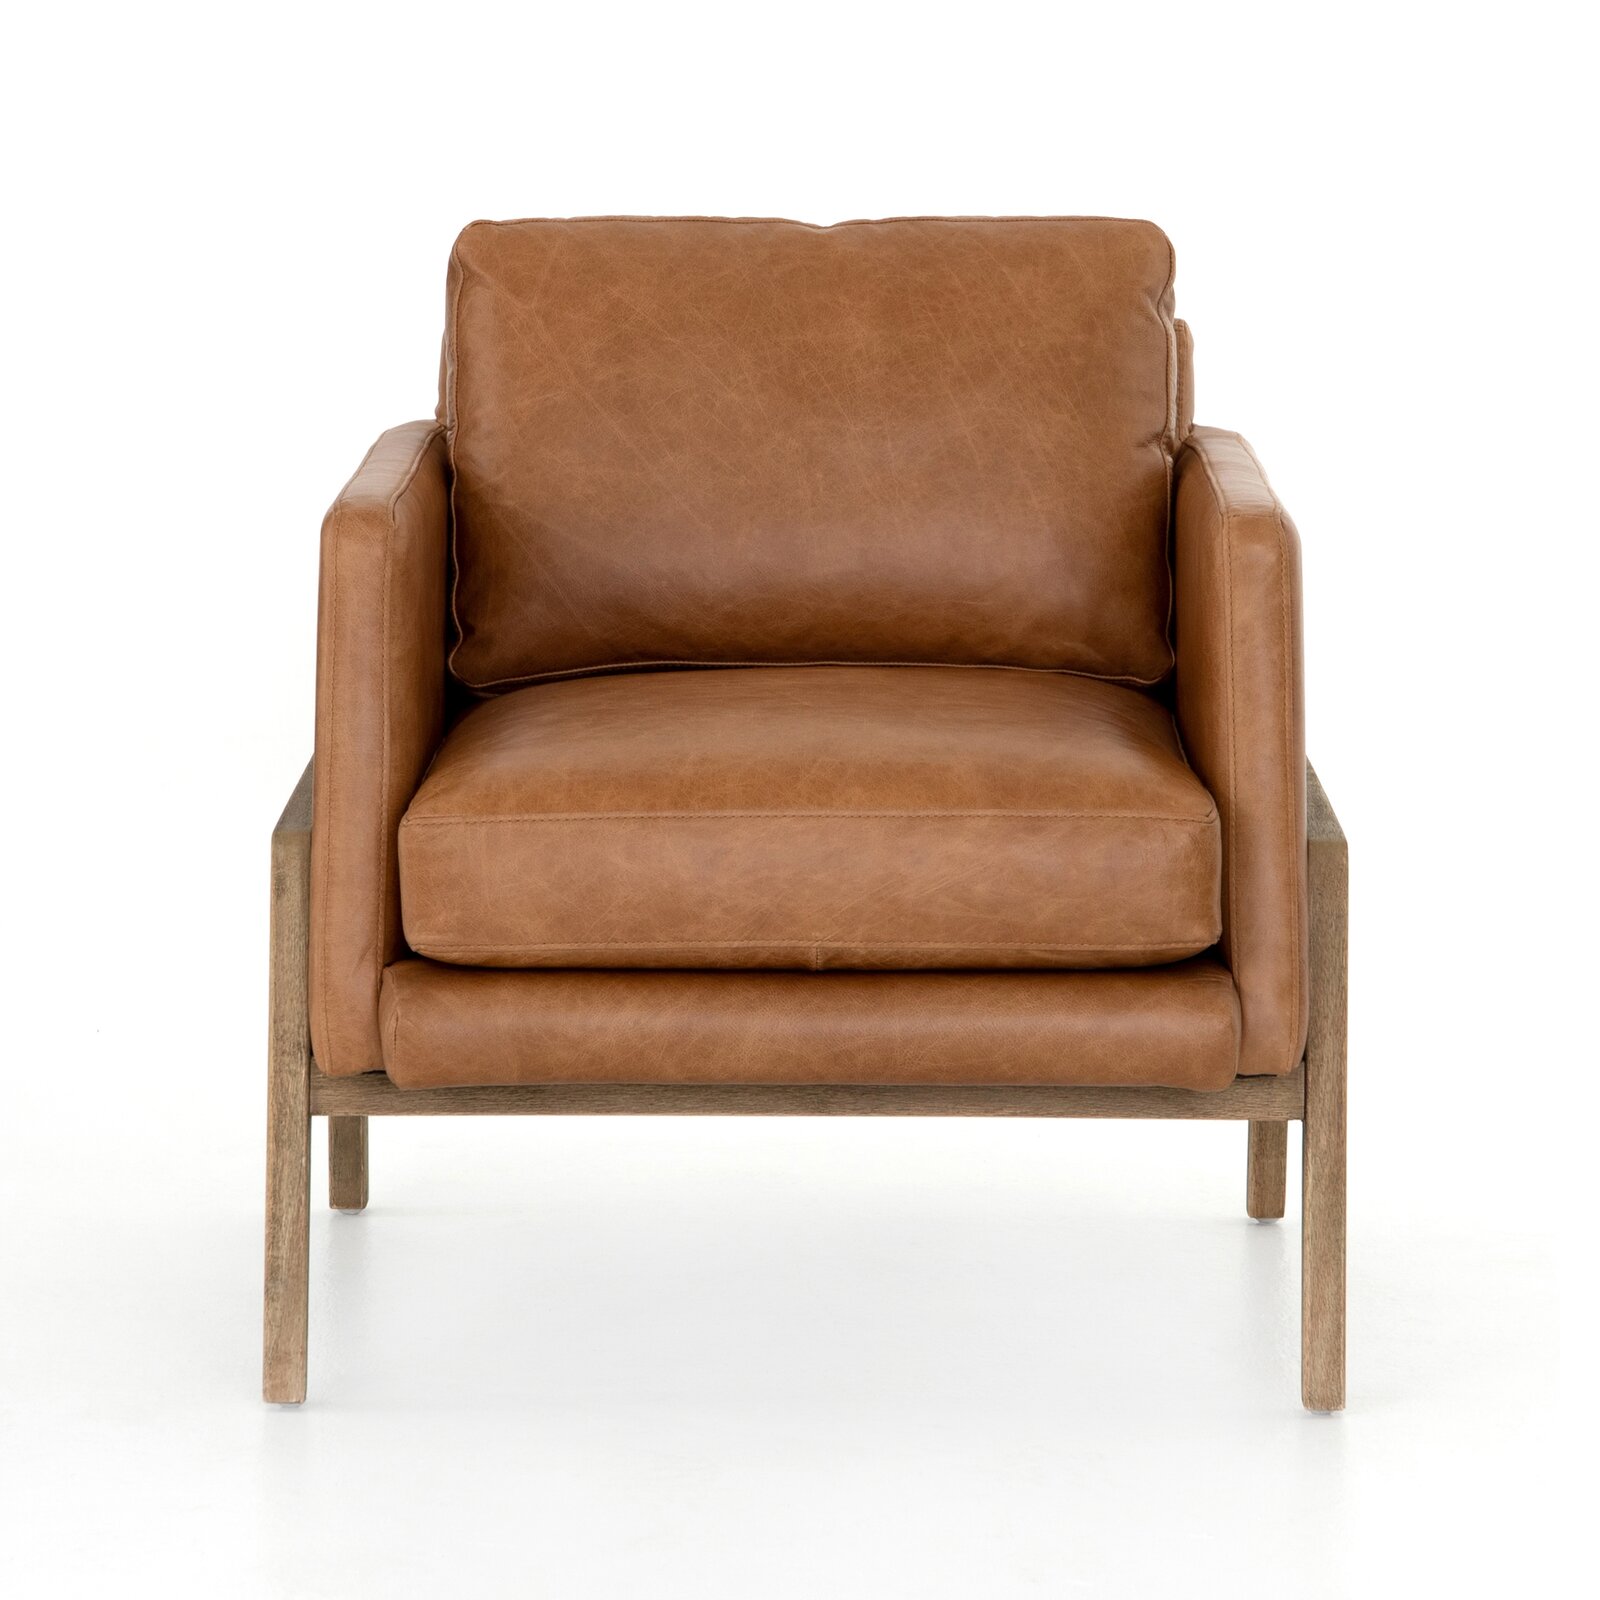 Foundry Select Solange Upholstered Armchair